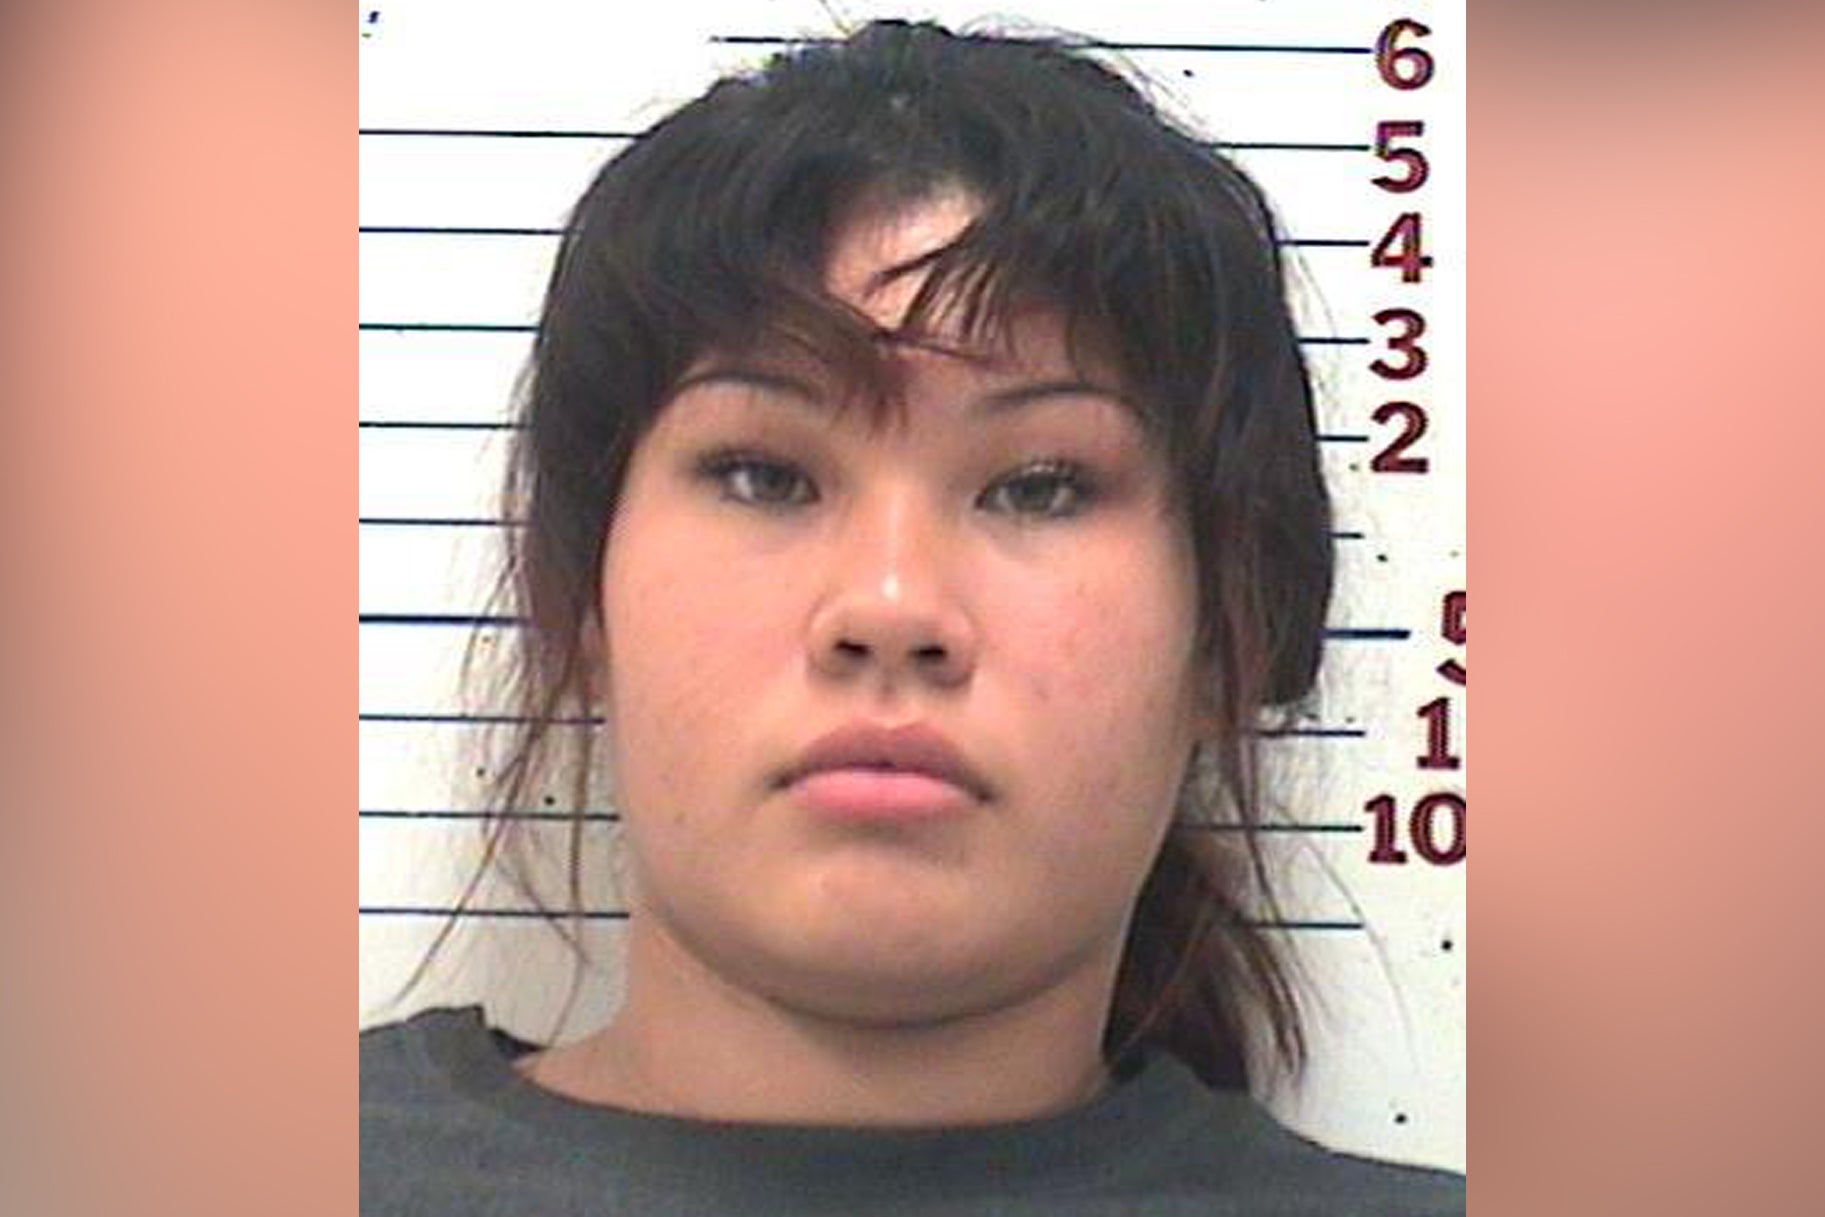 Brittney Poolaw, sentenced to four years in jail after she suffered a miscarriage